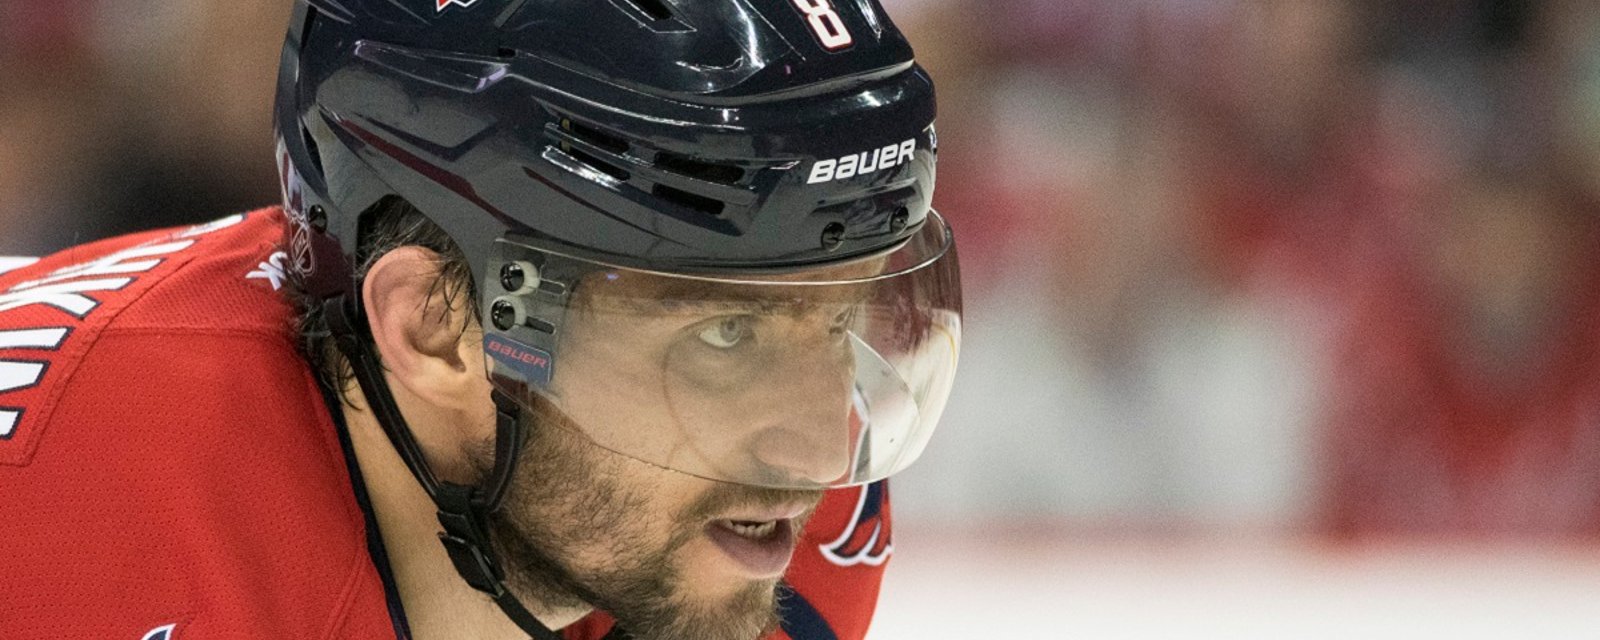 Breaking: Signs of a possible injury to Alex Ovechkin.